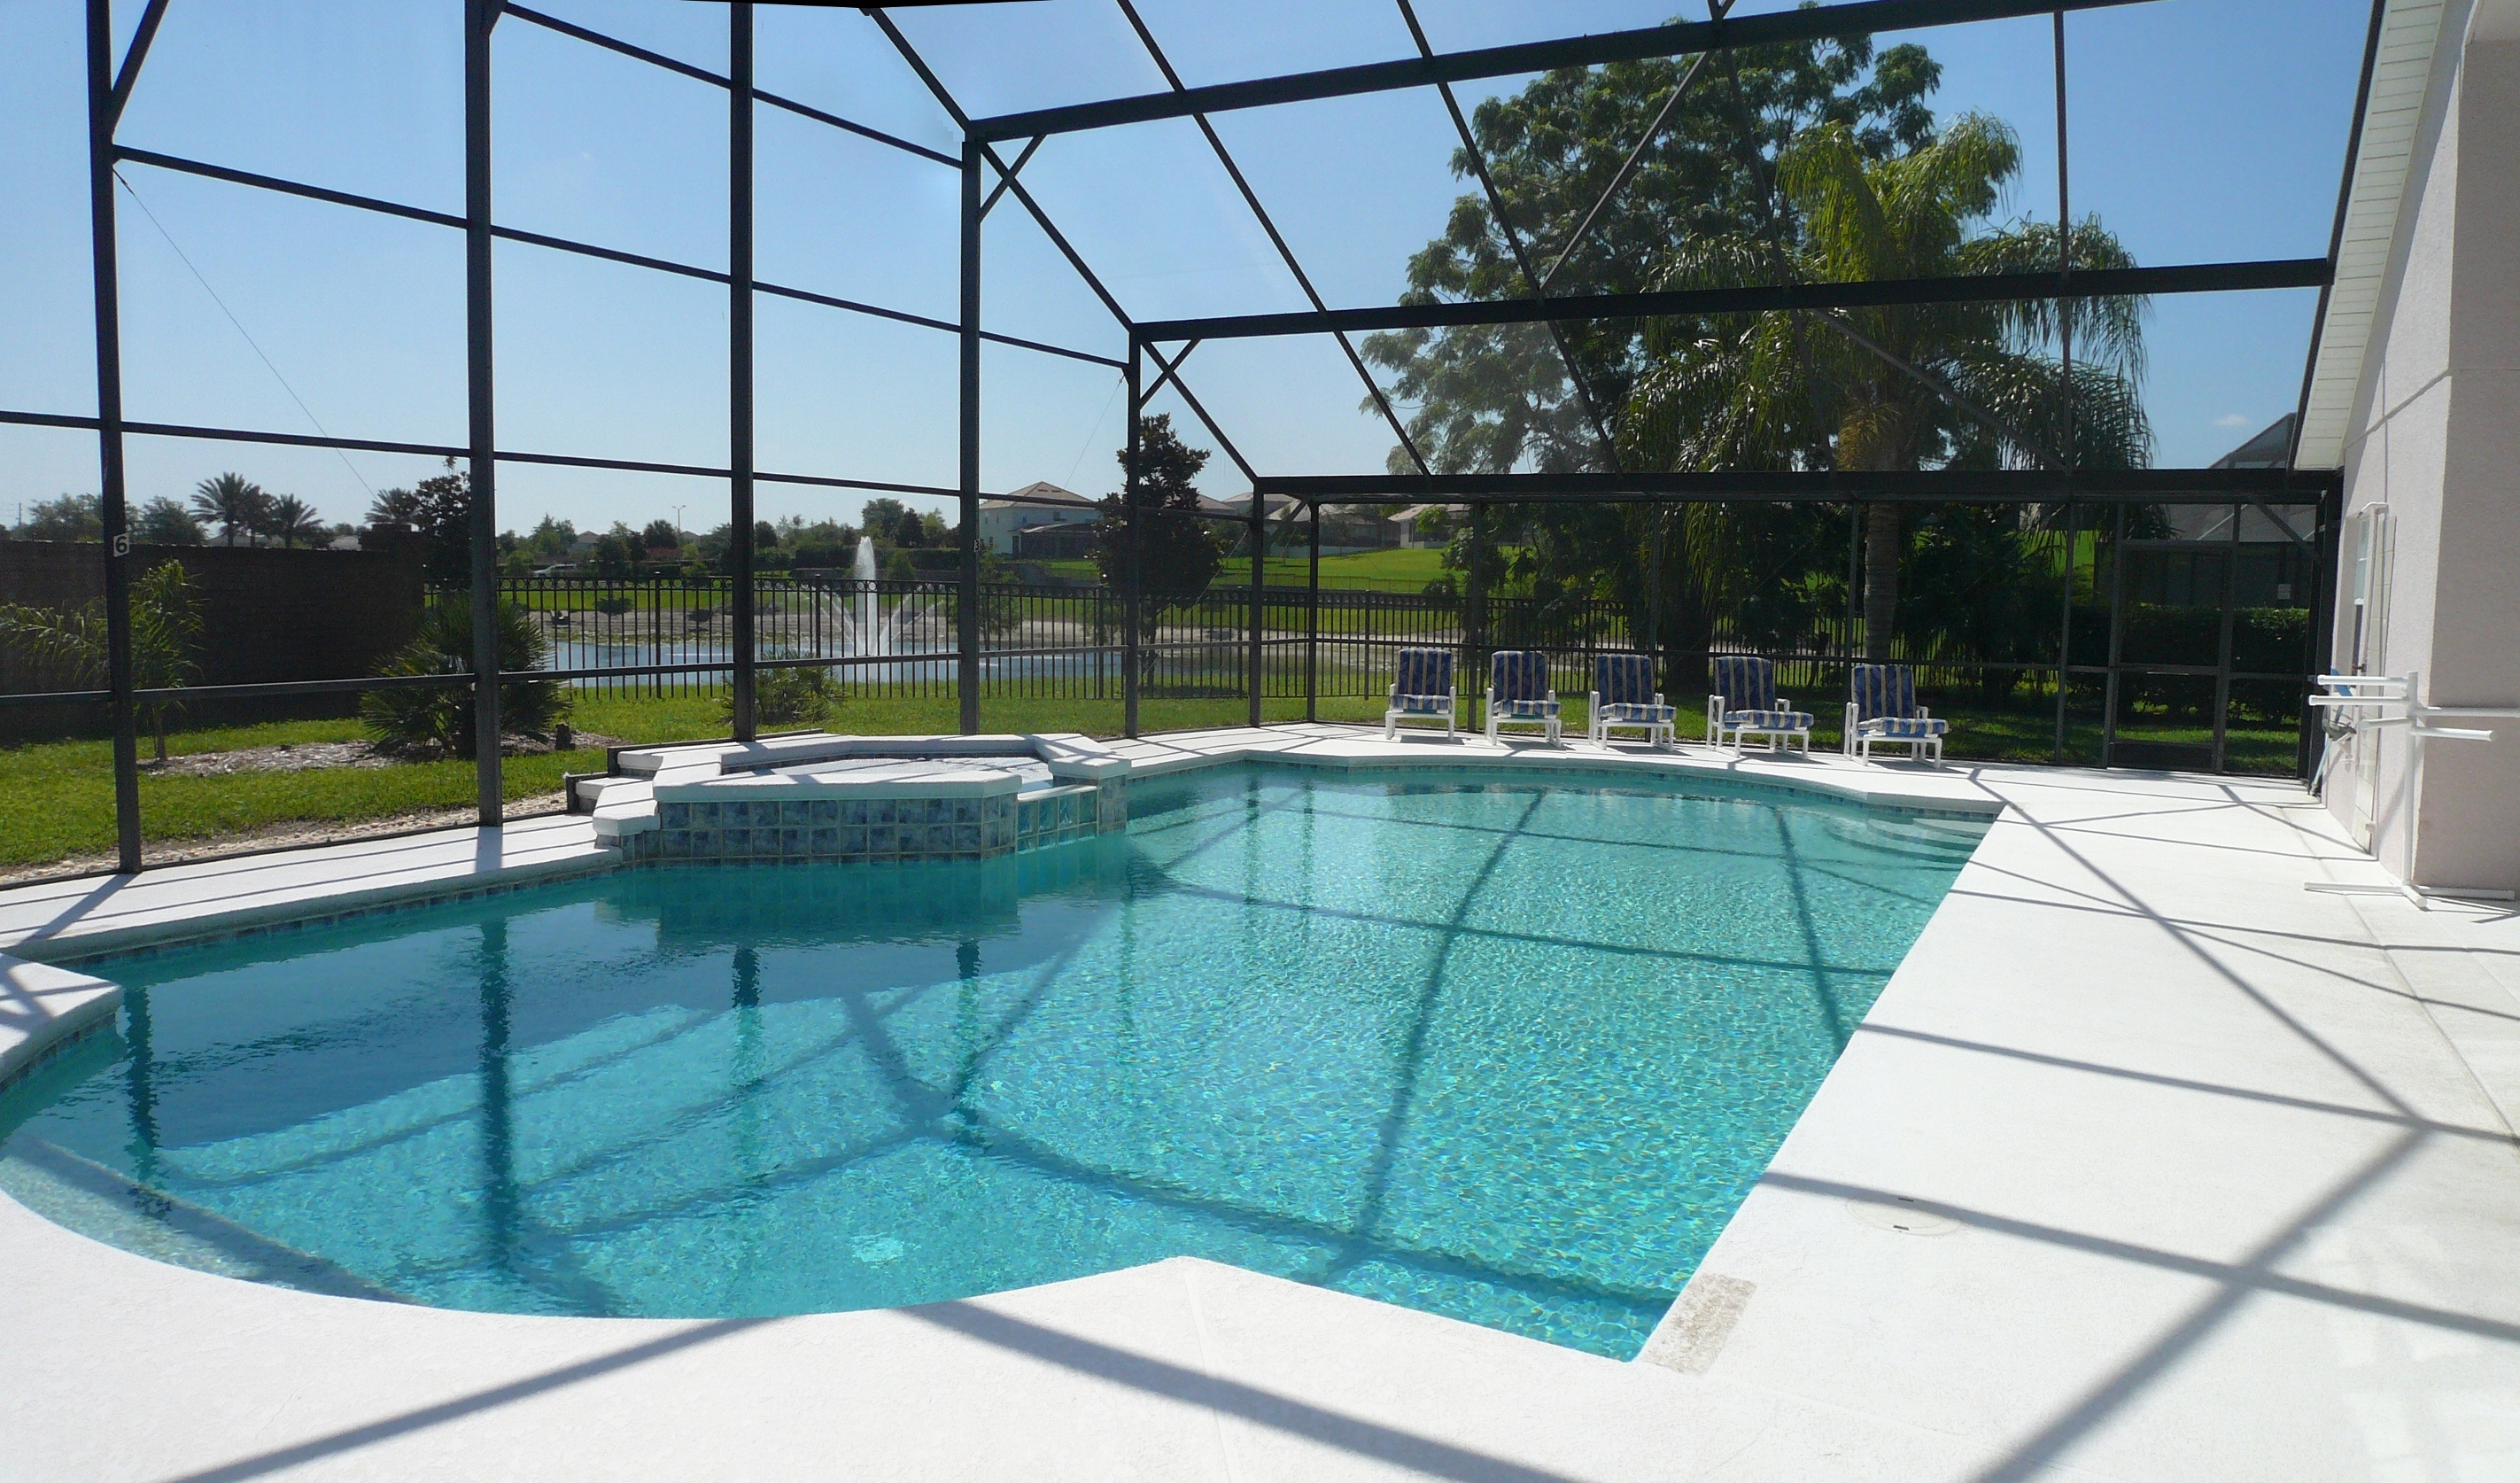 Huge Pool at Florida Villa 2 miles from the Walt Disney World Main Gate with Heated Pool & SPA & Games Room, This is a picture of the 40 Foot pool Spa of our Orlando / Kissimmee Vacation Home - Florida's Theme Park Villa.  Welcome to our Website!!